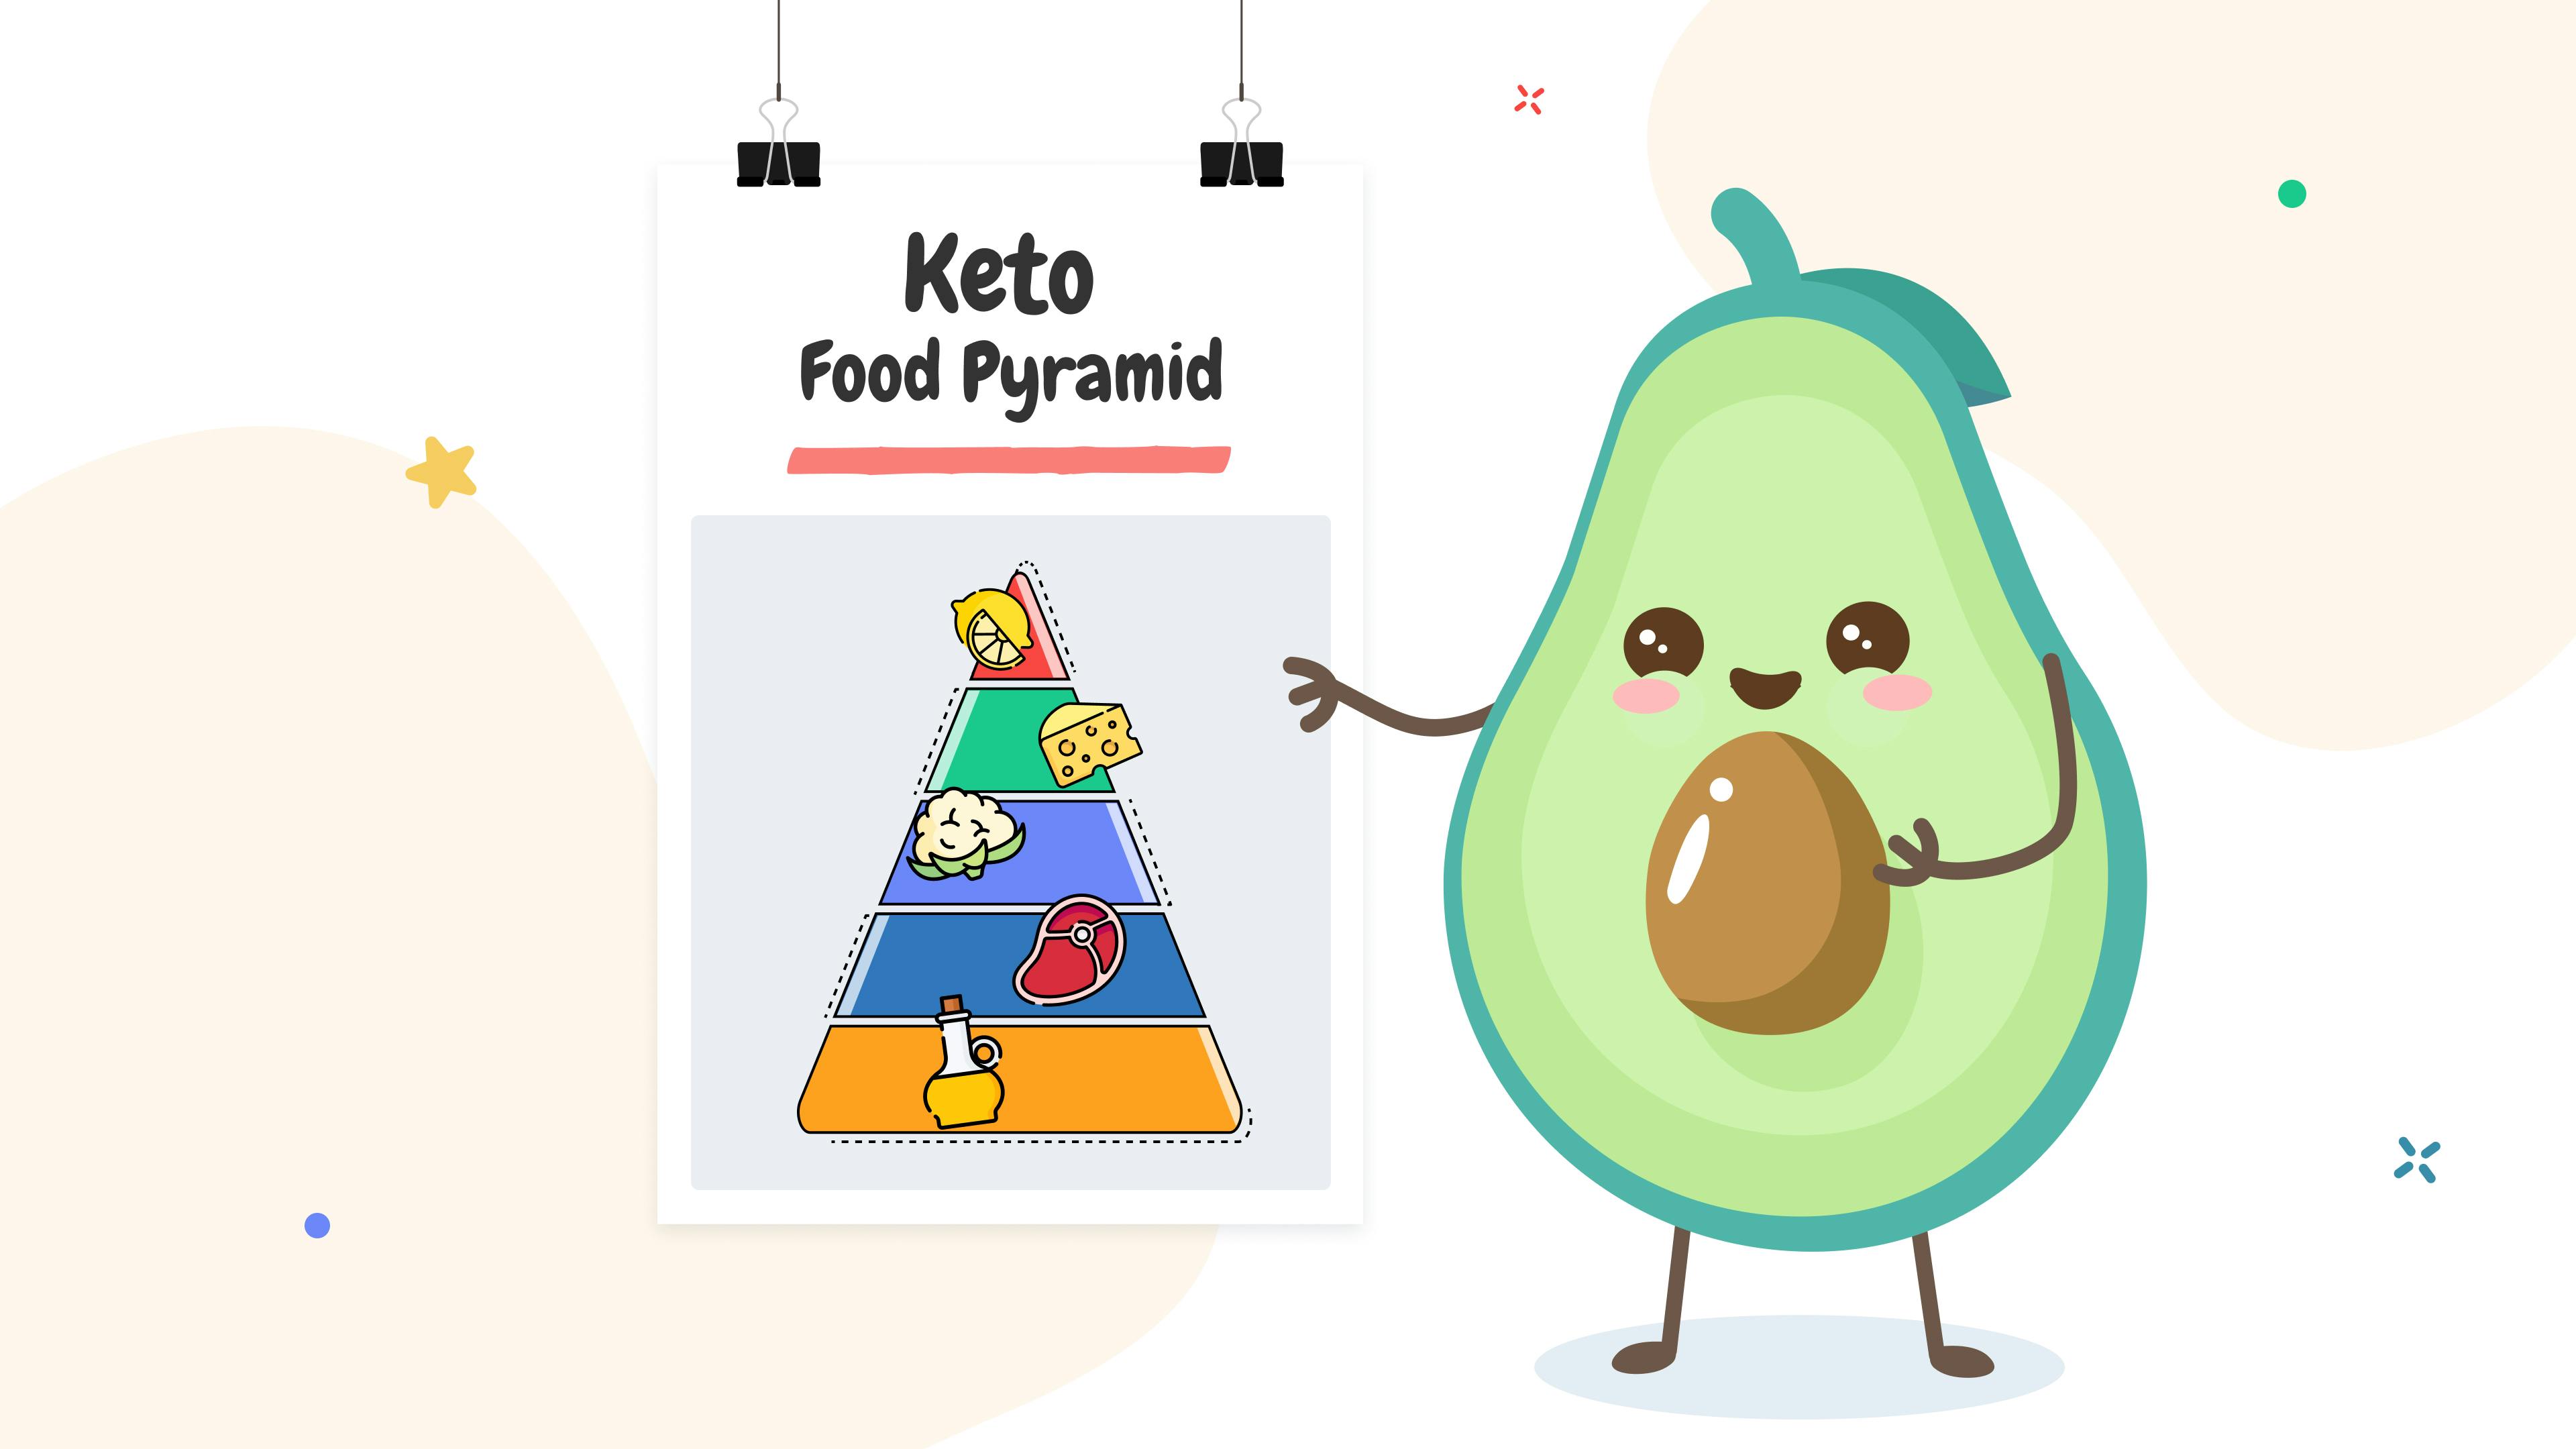 Keto Diet 101: The Ultimate Guide for Beginners